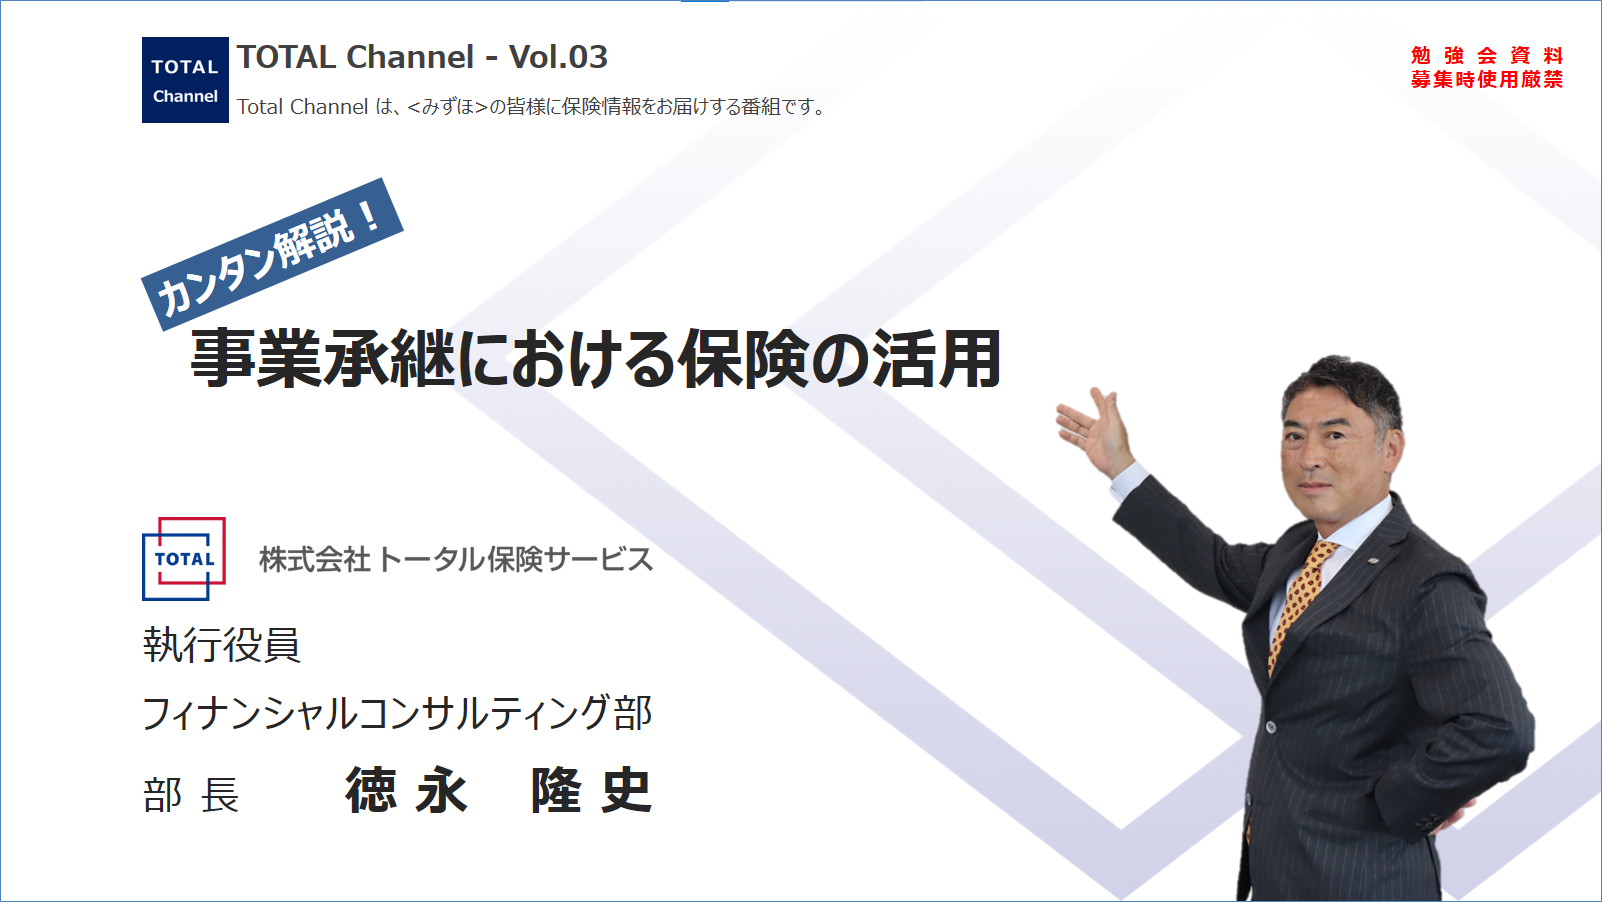 TOTAL Channel Vol03